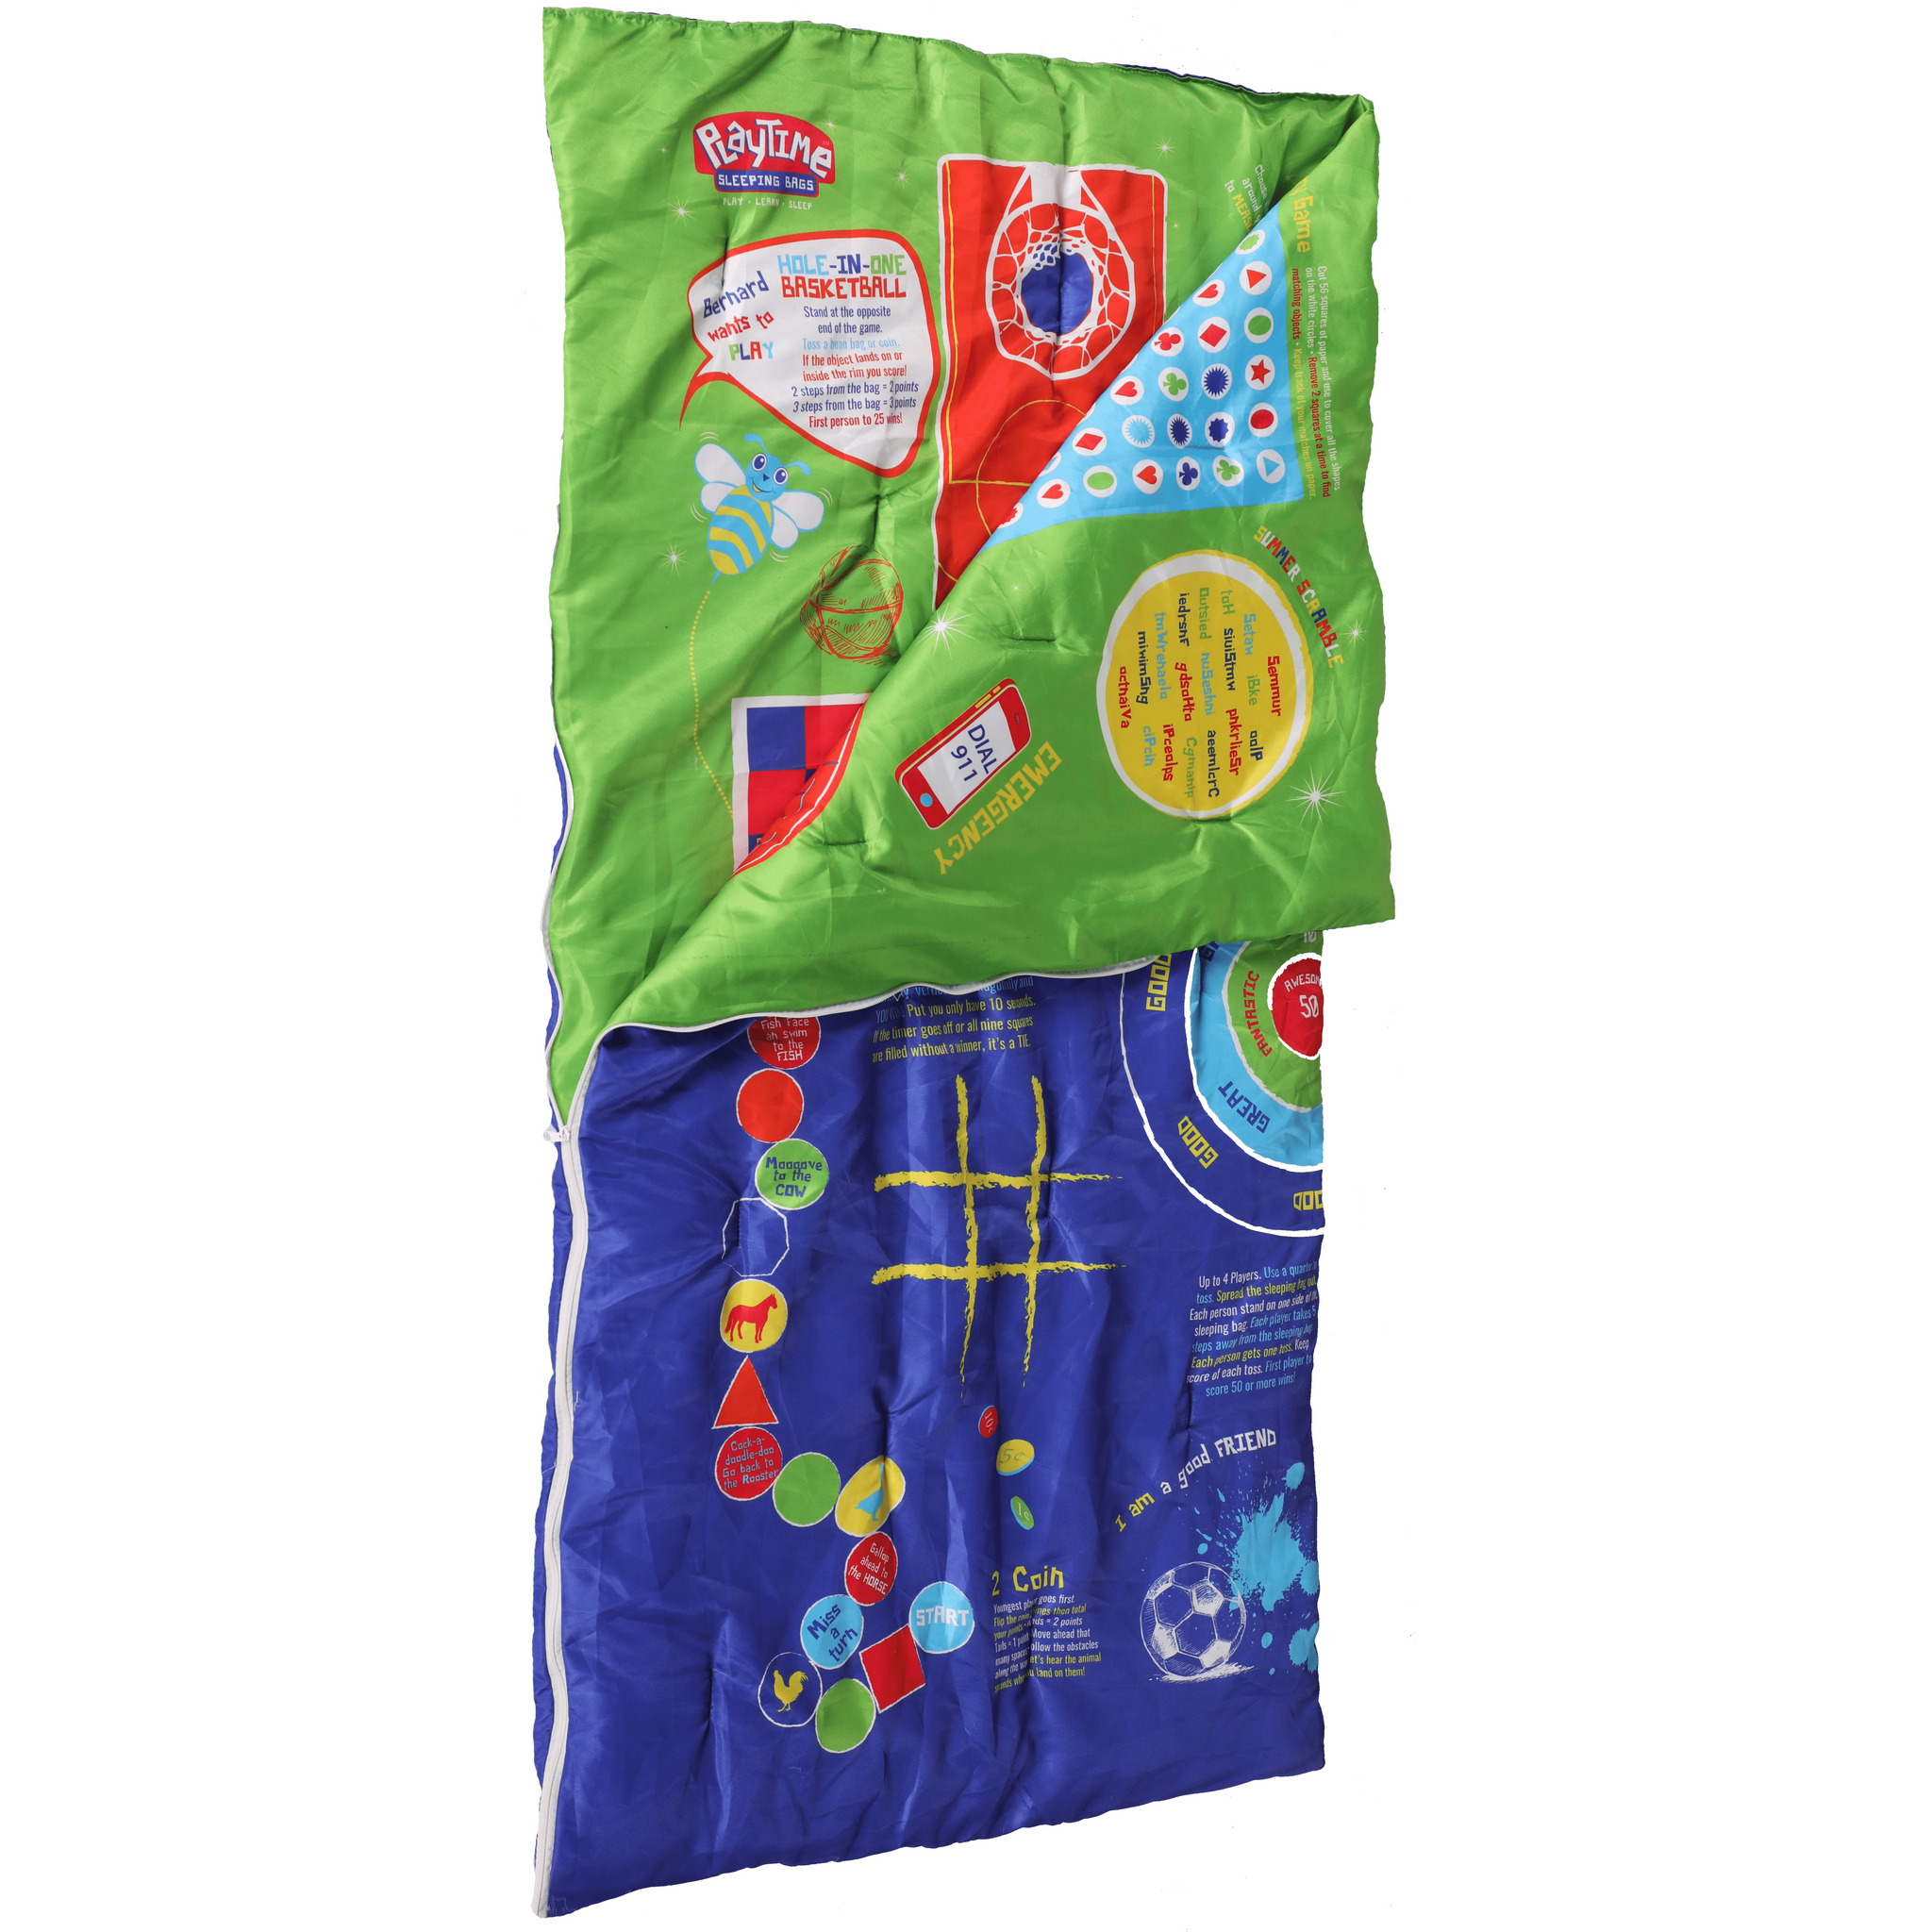 Playtime Reversible Slumber Bag, Play Mat & Bed Cover. Over 35 Interactive Fun Games, Puzzles and Game Pieces. 100% Cotton. (Blue/Green)